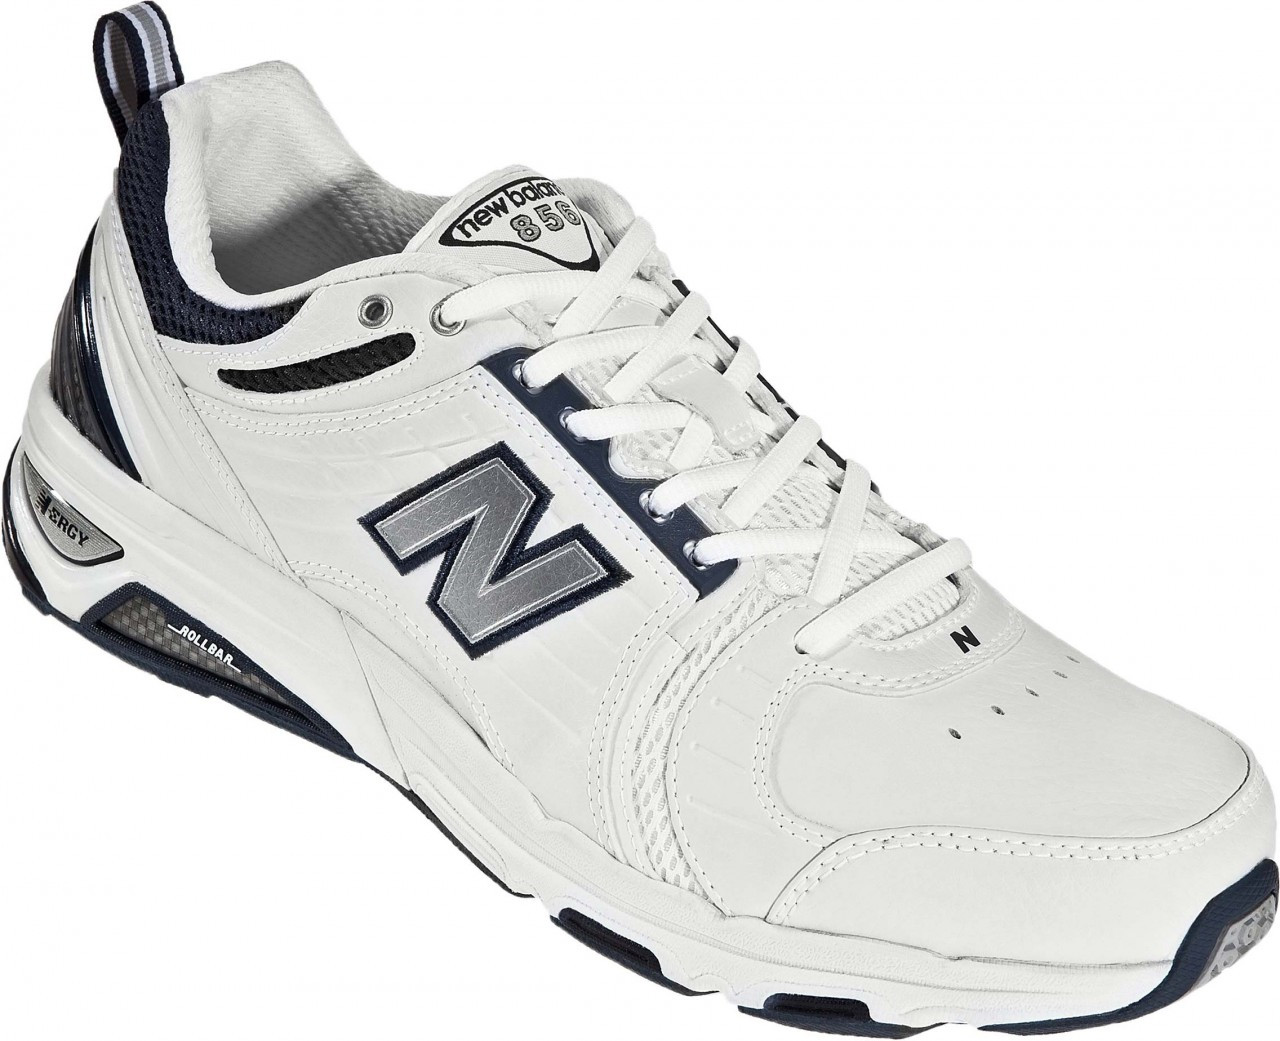 New Balance Men's 856 - FREE Shipping & FREE Returns - Other Athletic ...